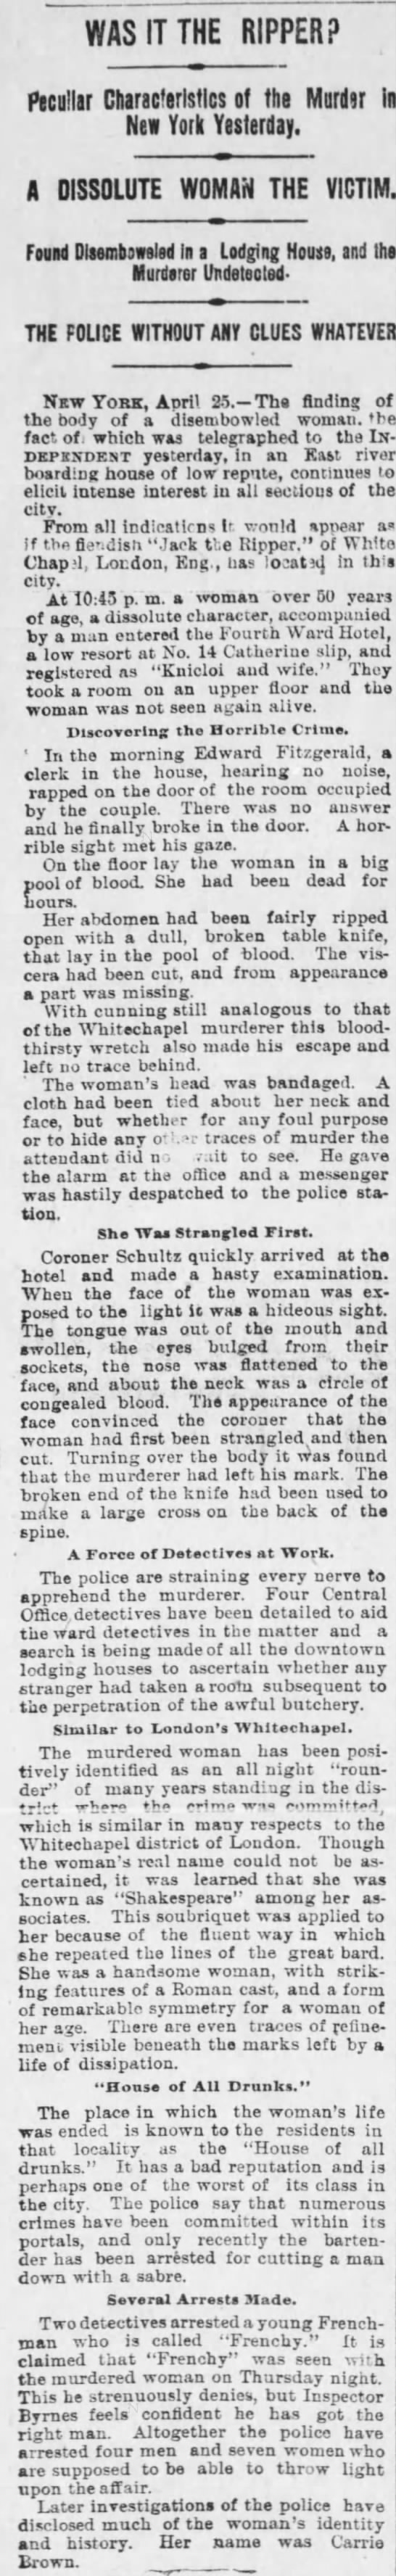 Newspaper attributes murder of woman in New York to Jack the Ripper, 1891 - 